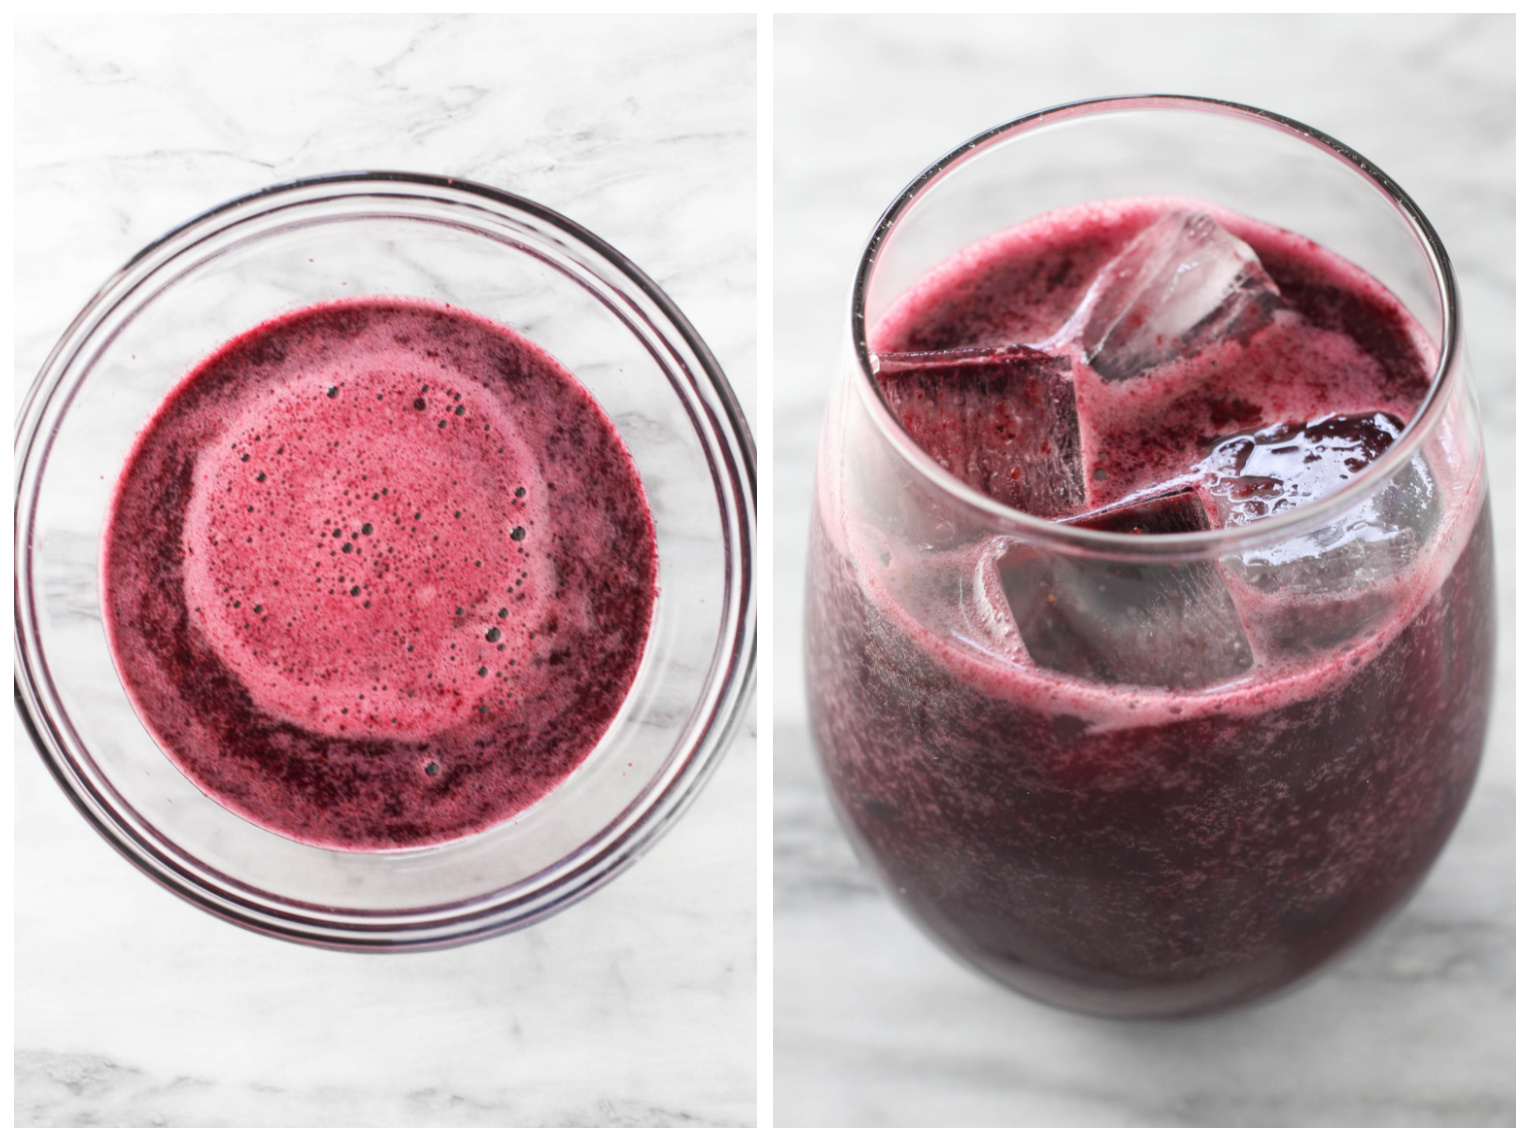 Two images side by side. On the left, blueberry juice in a bowl. On the right, blueberry juice with ice in a glass.